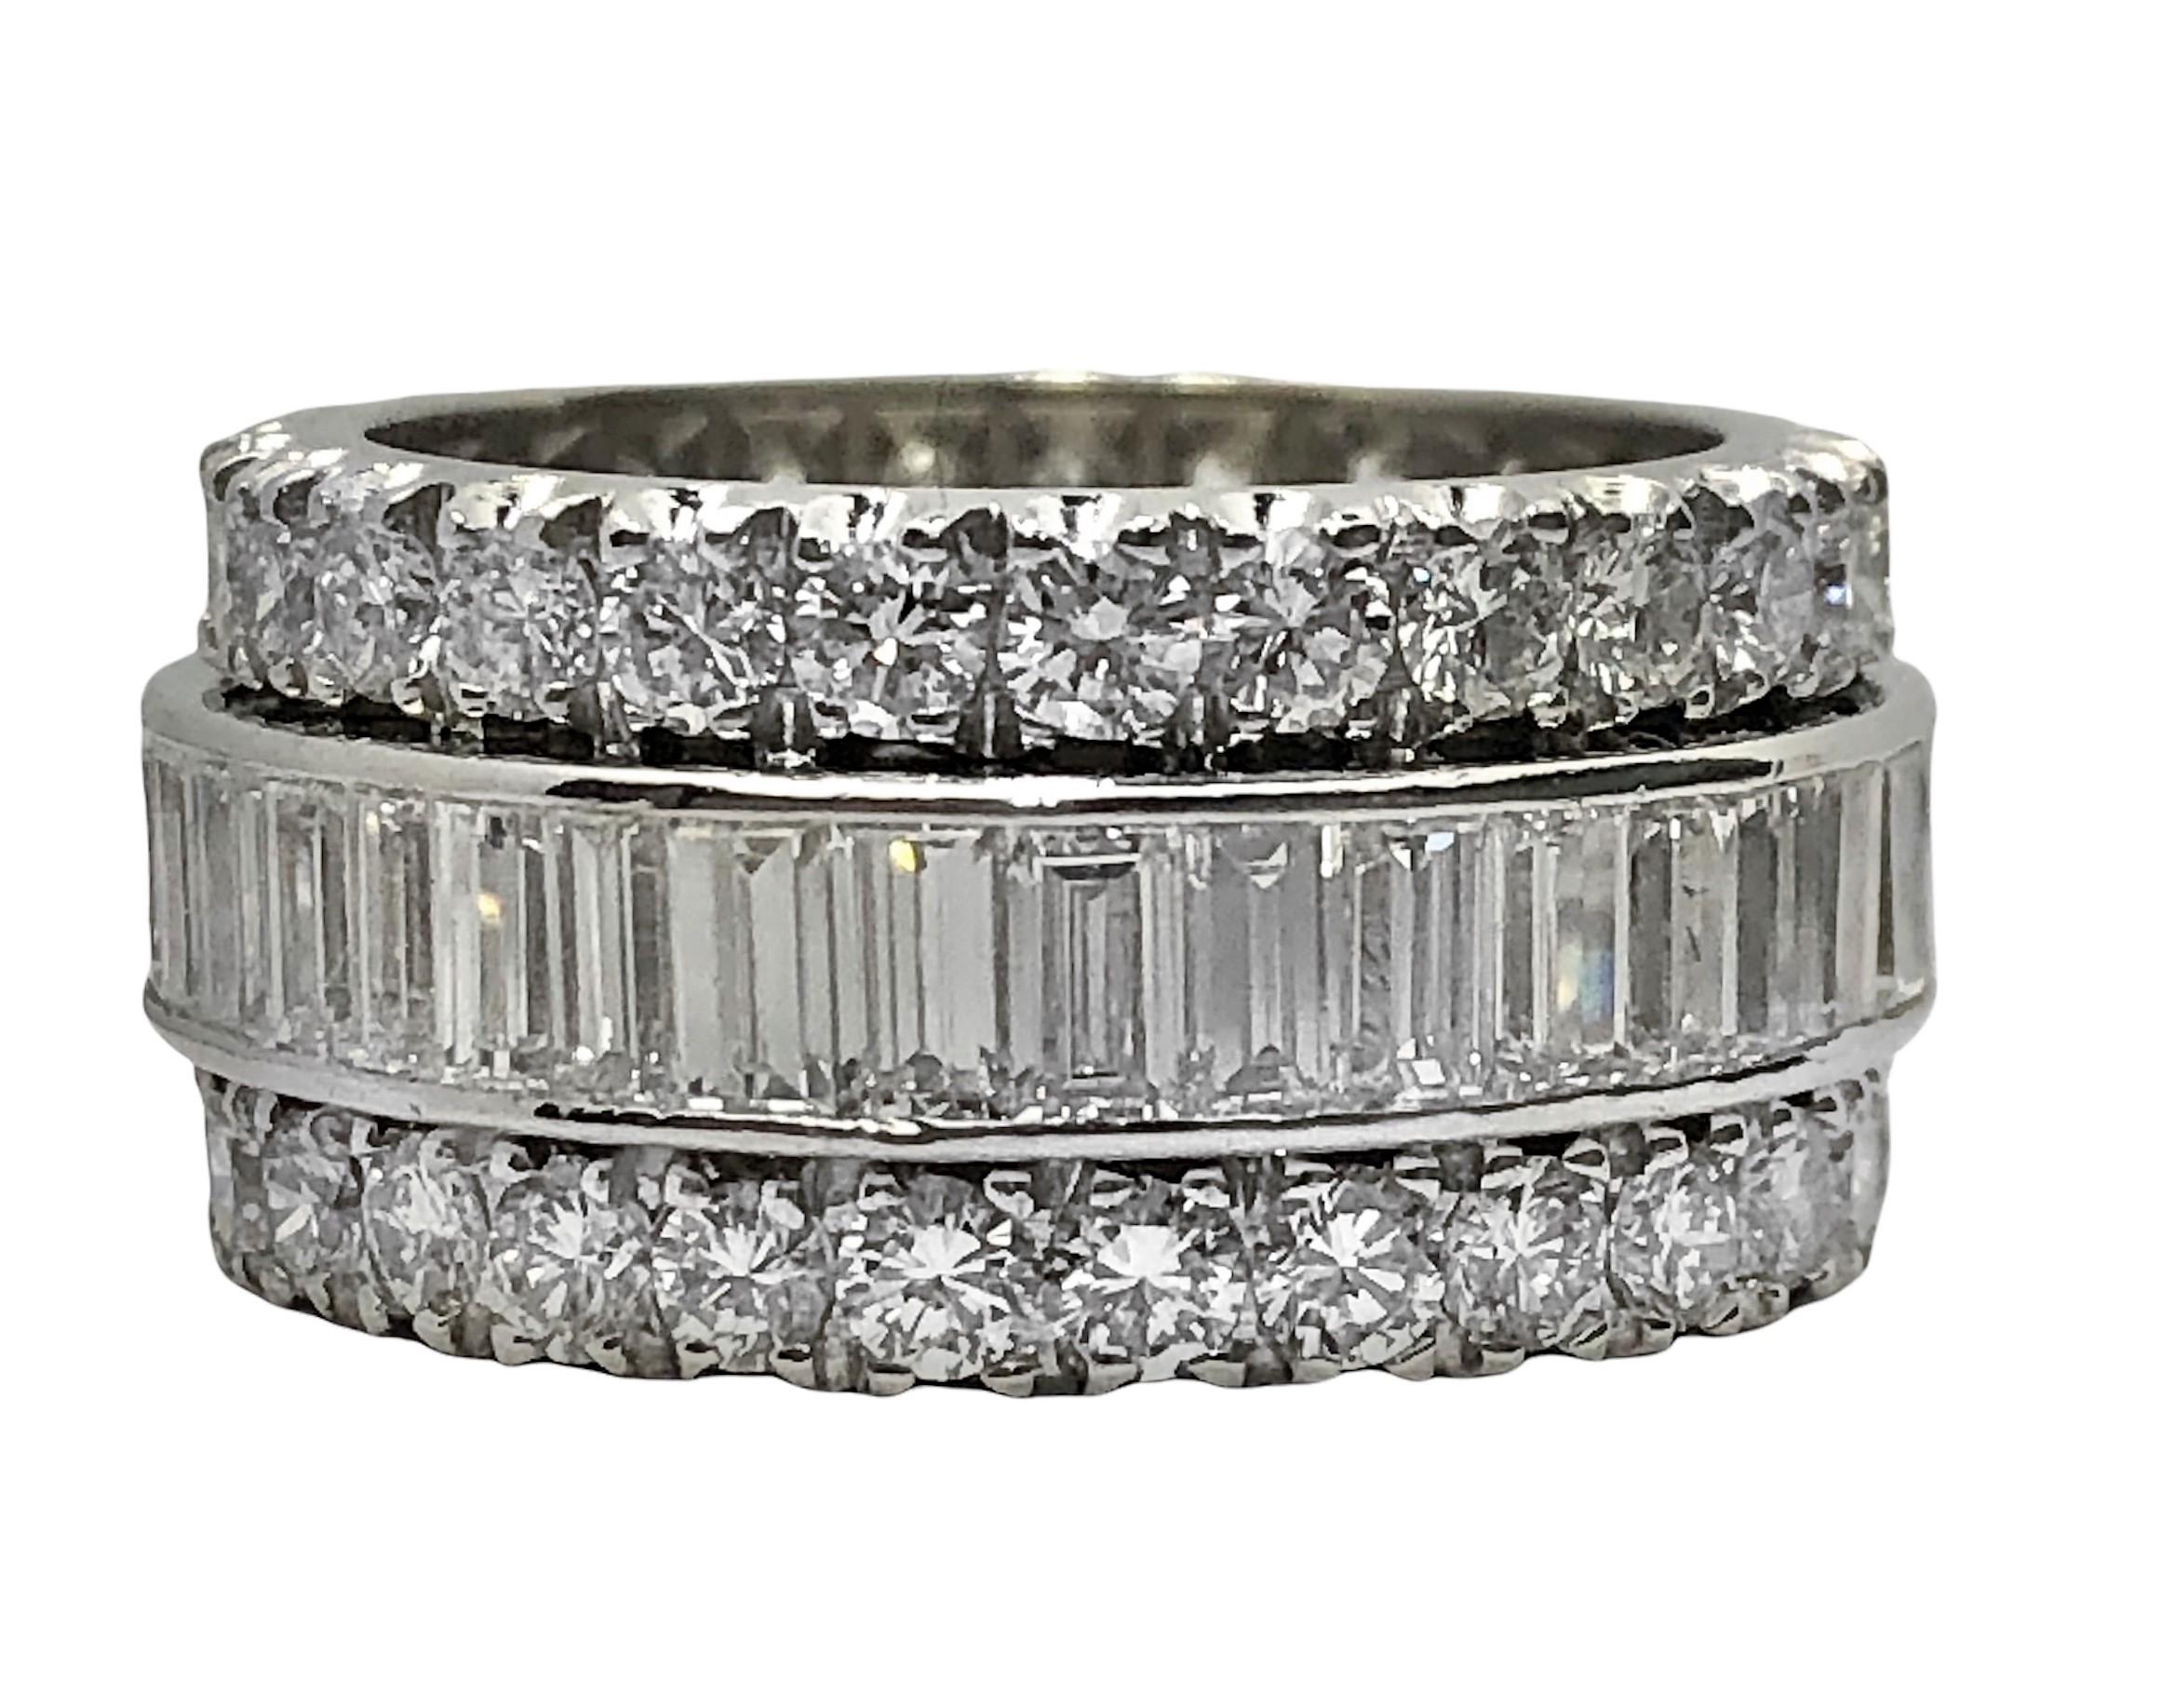 Meticulously crafted in platinum, this Mid Century, classic, 3 row eternity band is set with 2 outer rows of round brilliant cut diamonds flanking the center row of baguettes. The total approximate diamond weight is 7.75ct of overall G color and VS1